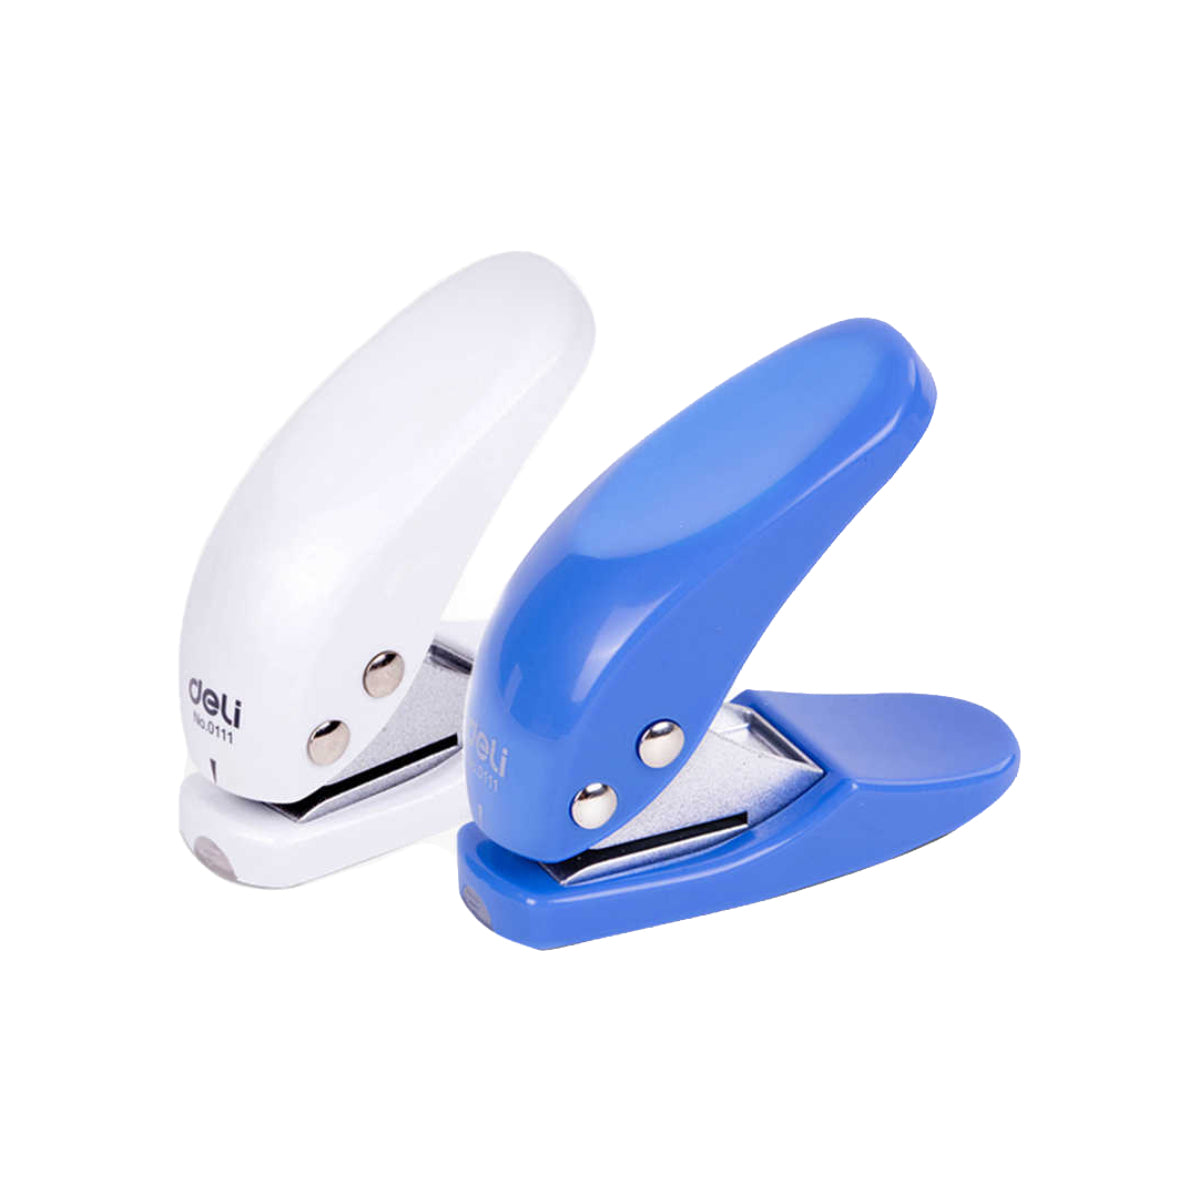 deli Single Hole Puncher No. 0111, 10 Sheets Capacity, Assorted Colors